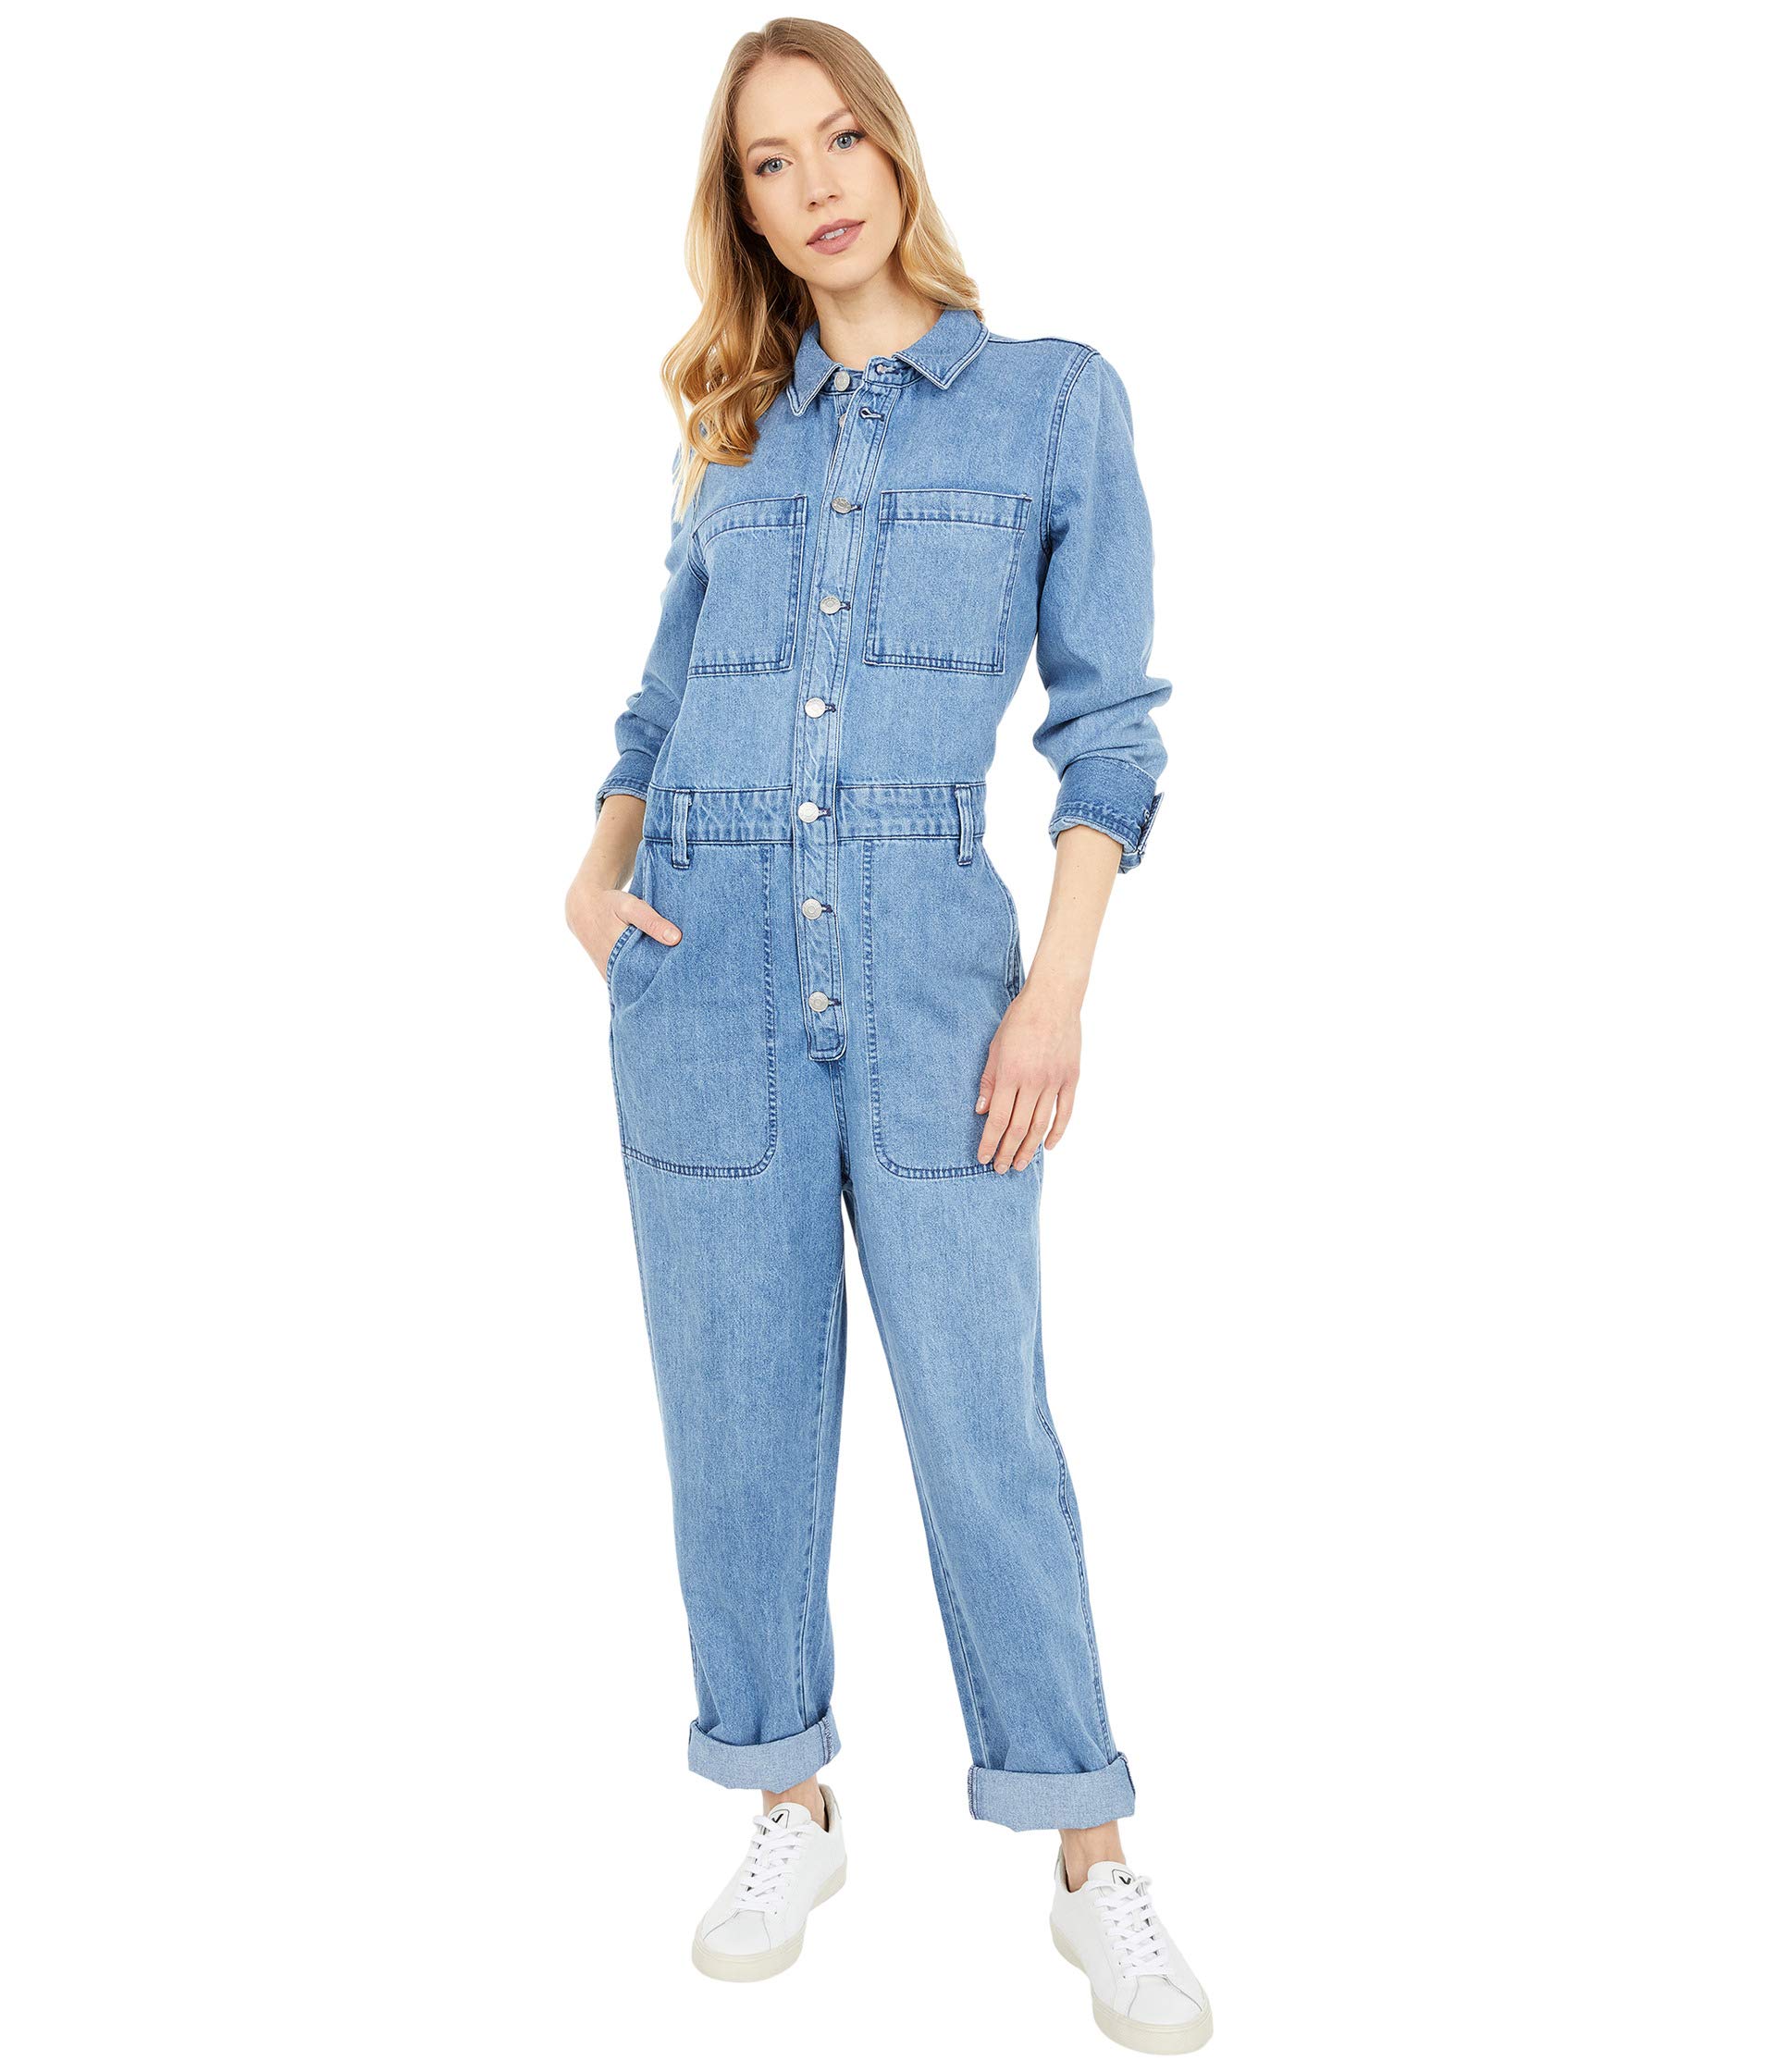 Брюки Madewell, Denim Relaxed Coverall Jumpsuit in Glenroy Wash шорты madewell relaxed denim shorts in haywood wash